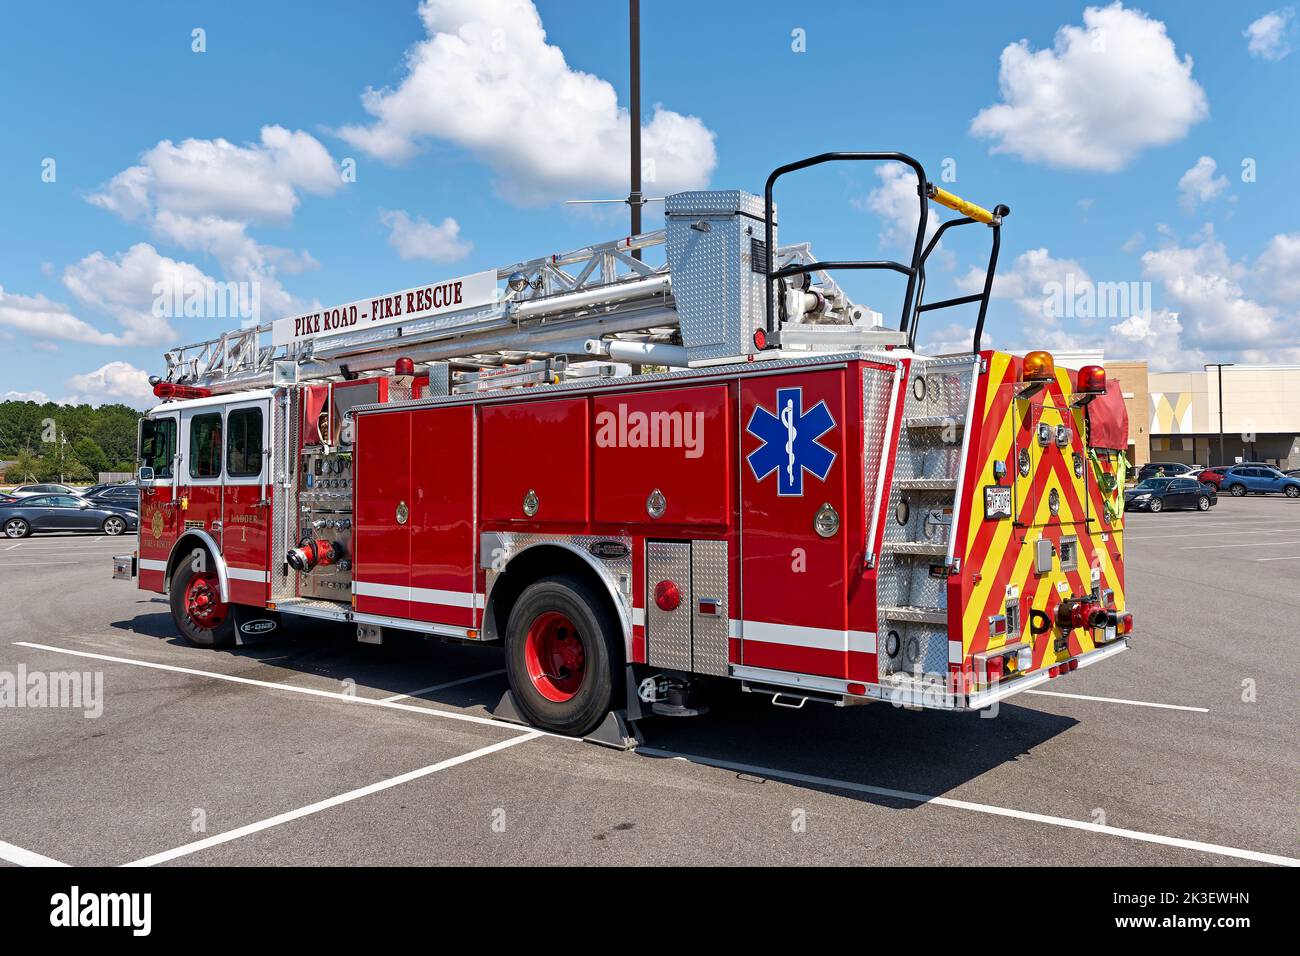 Large volunteer red ladder truck or fire truck used as an emergency vehicle and rescue vehicle for a local fire department in Pike Road Alabama, USA. Stock Photo